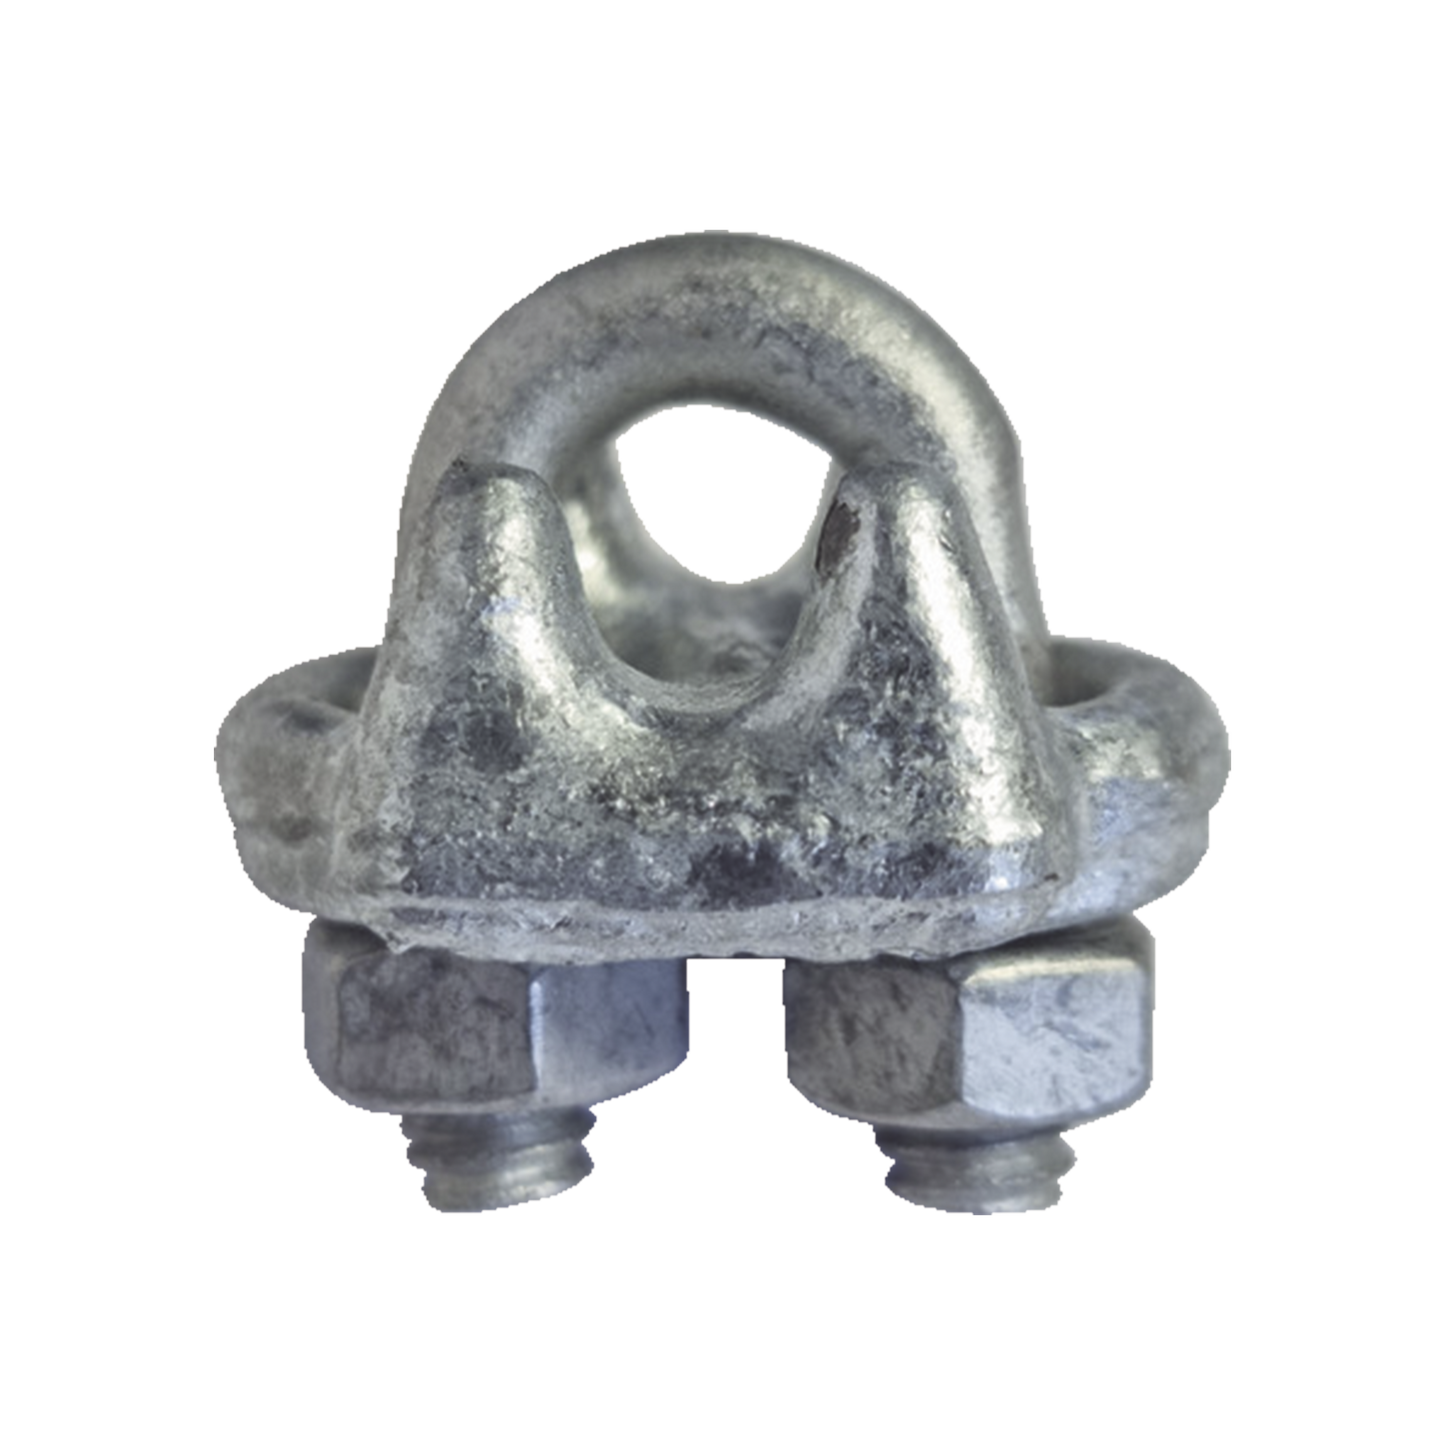 Forged Steel Clamp, Cable Clip for 1/4" Hot-Dip Galvanized Steel Cable.